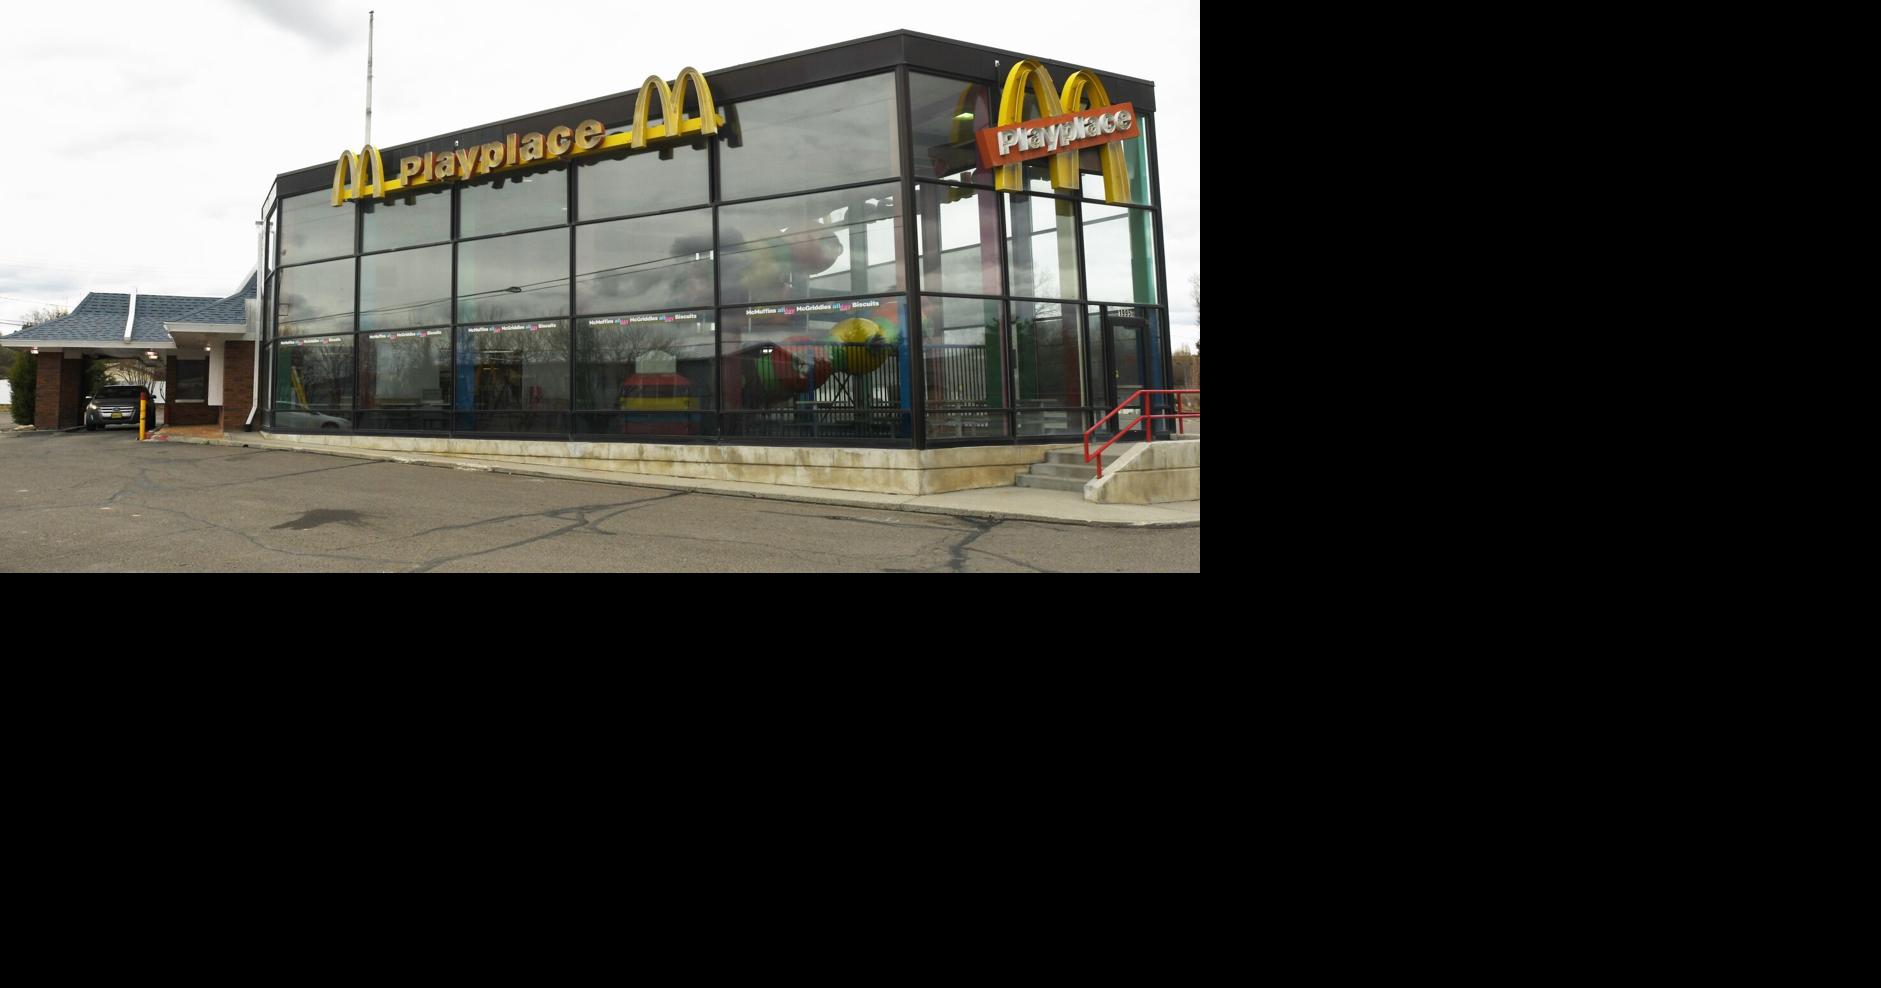 East-end McDonald’s closing for remodel, removal of ‘Playplace’ | Local